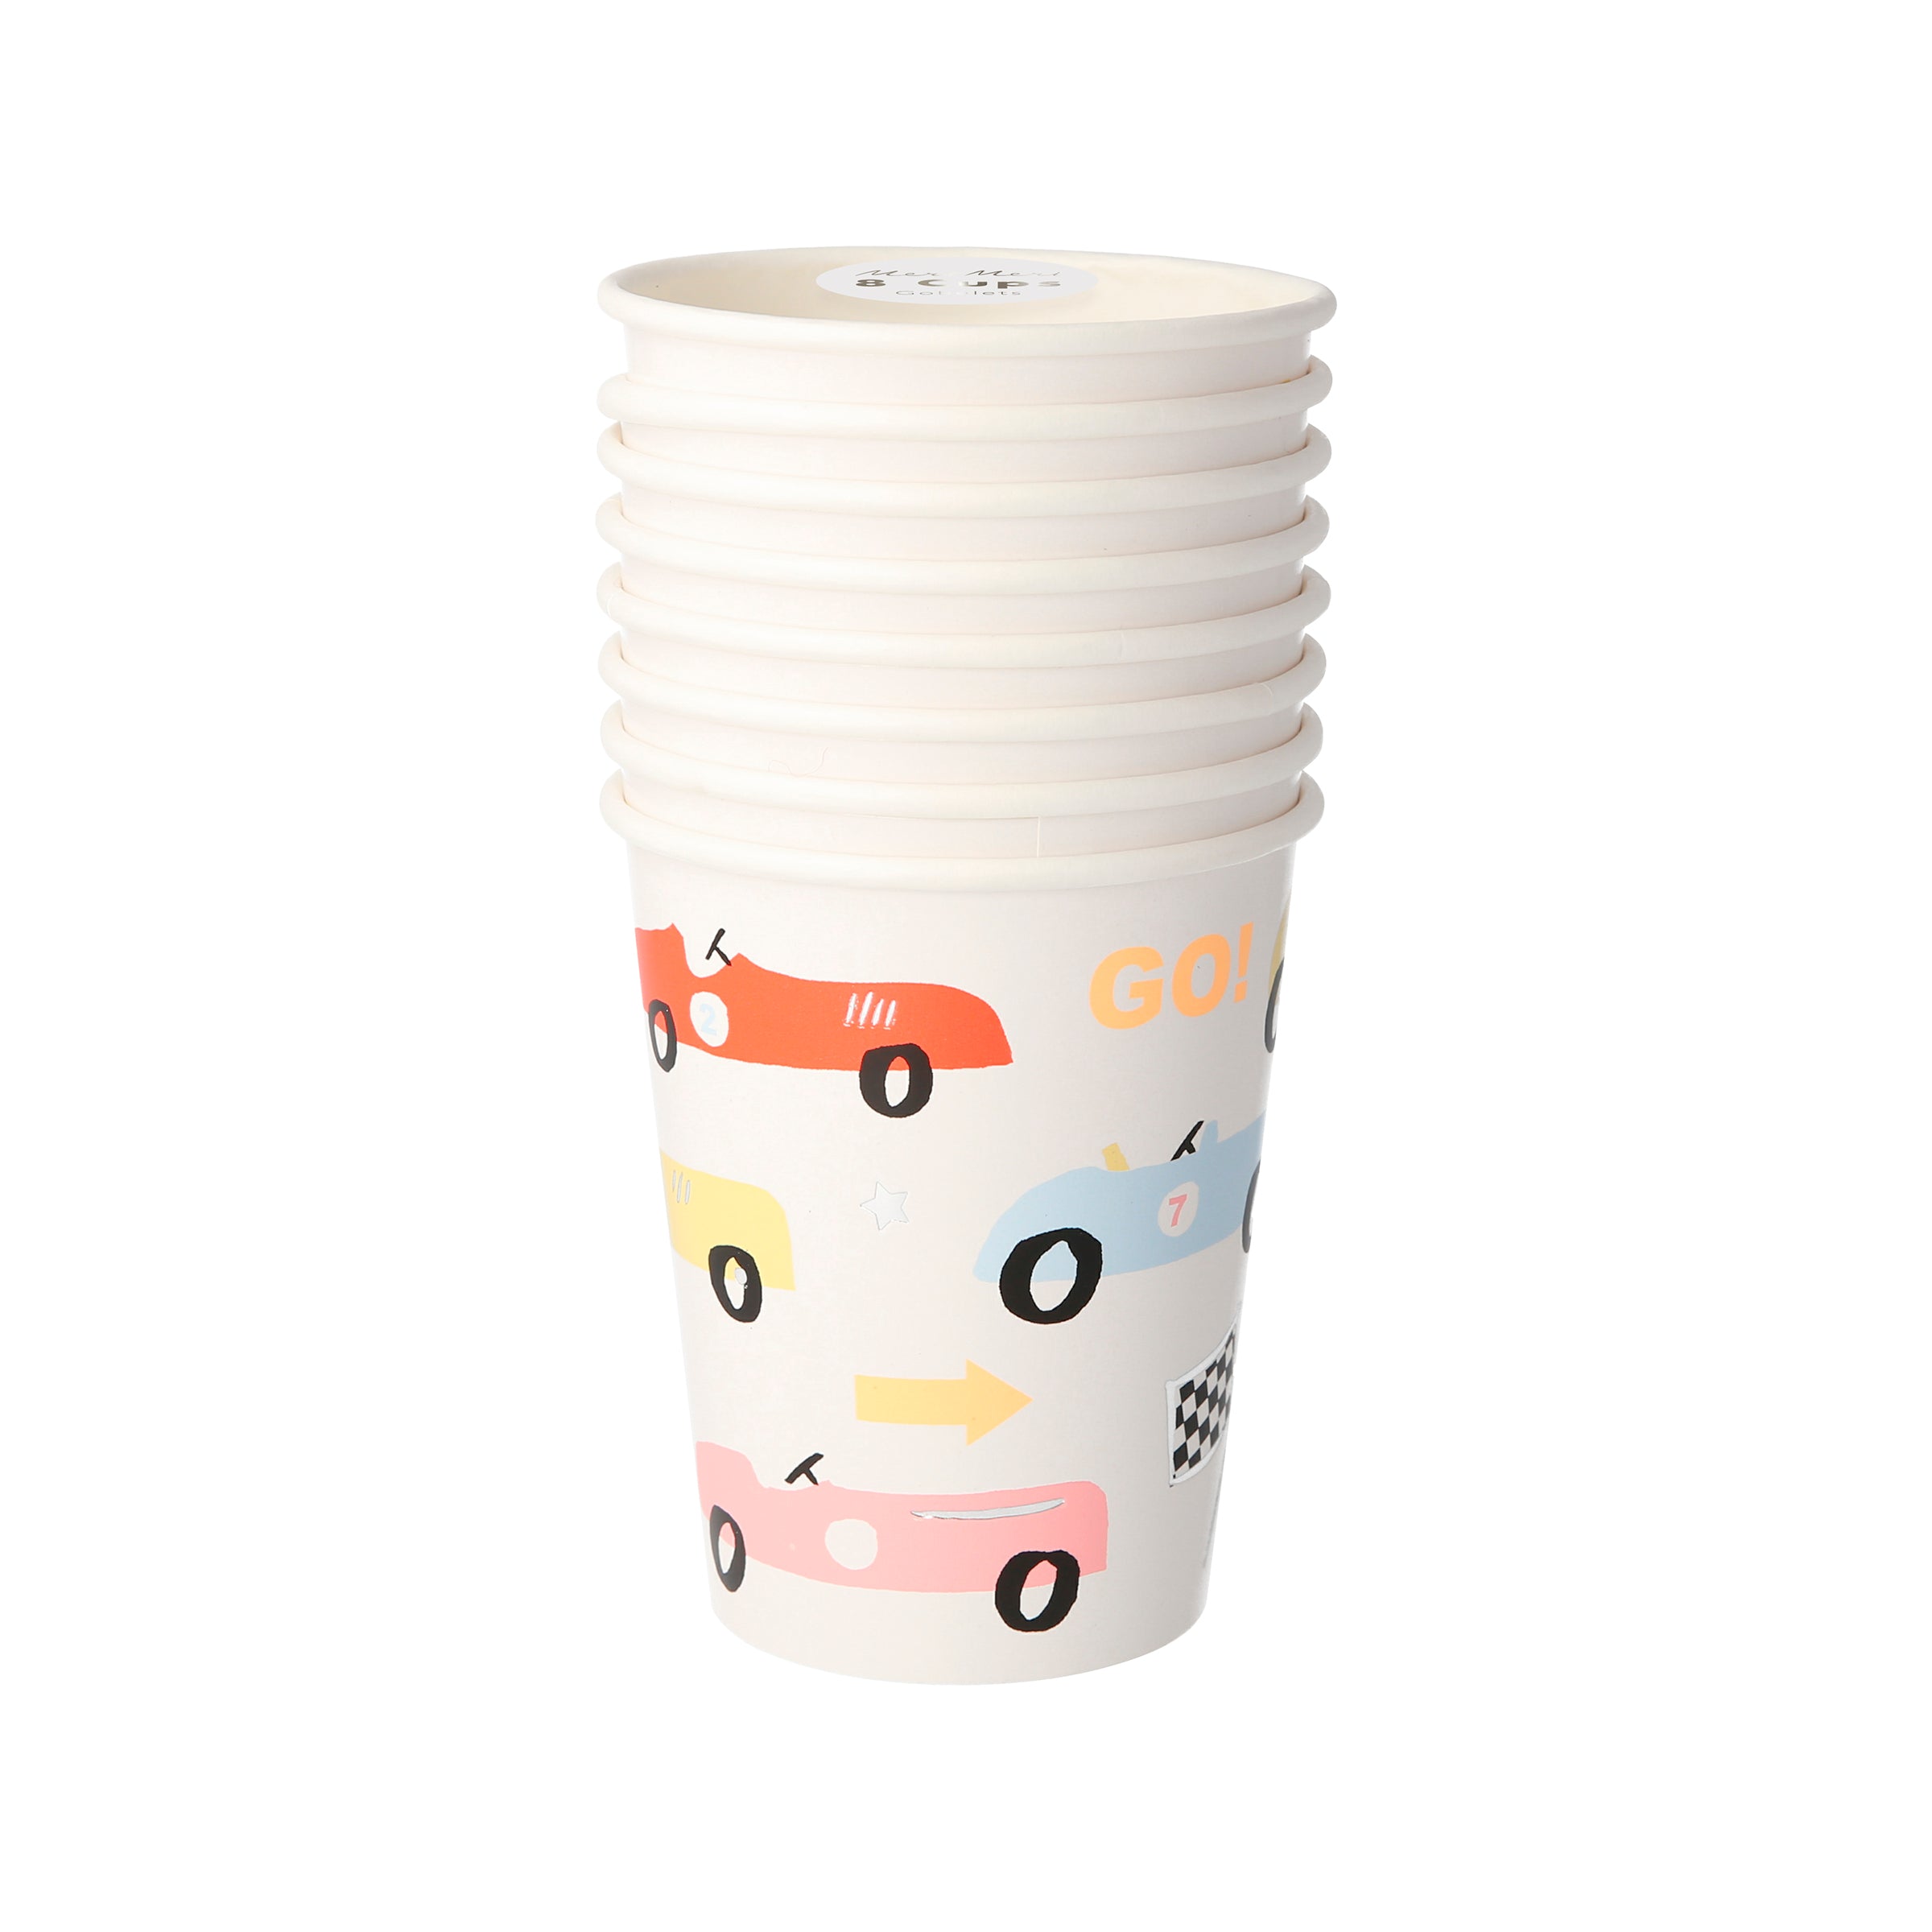 Our party cups are perfect for boys birthday party ideas.